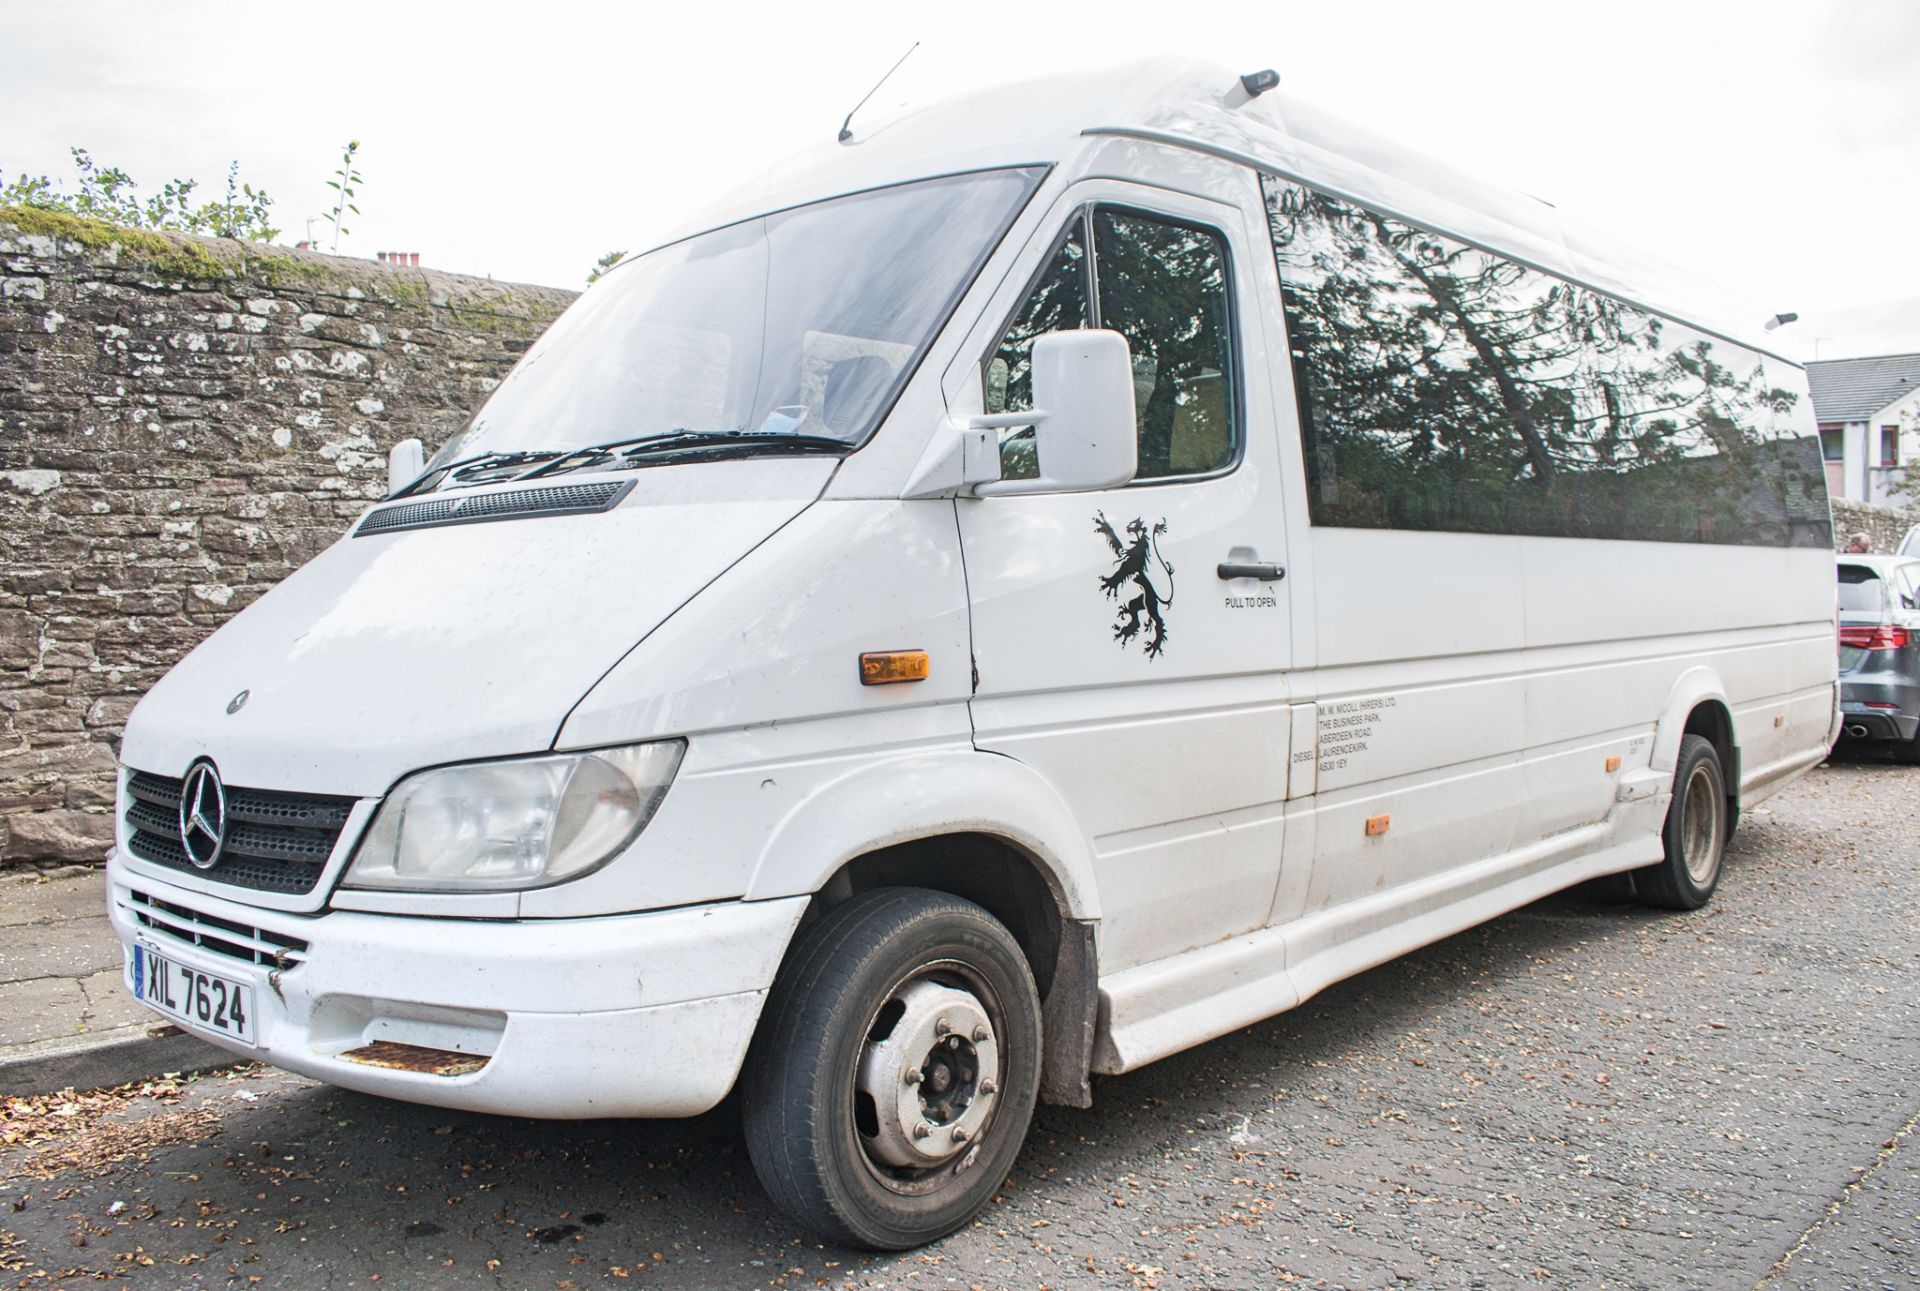 Mercedes Benz Sprinter 413 CDi KVC 16 seat mini bus Registration Number: XIL 7624 Date of - Image 4 of 12